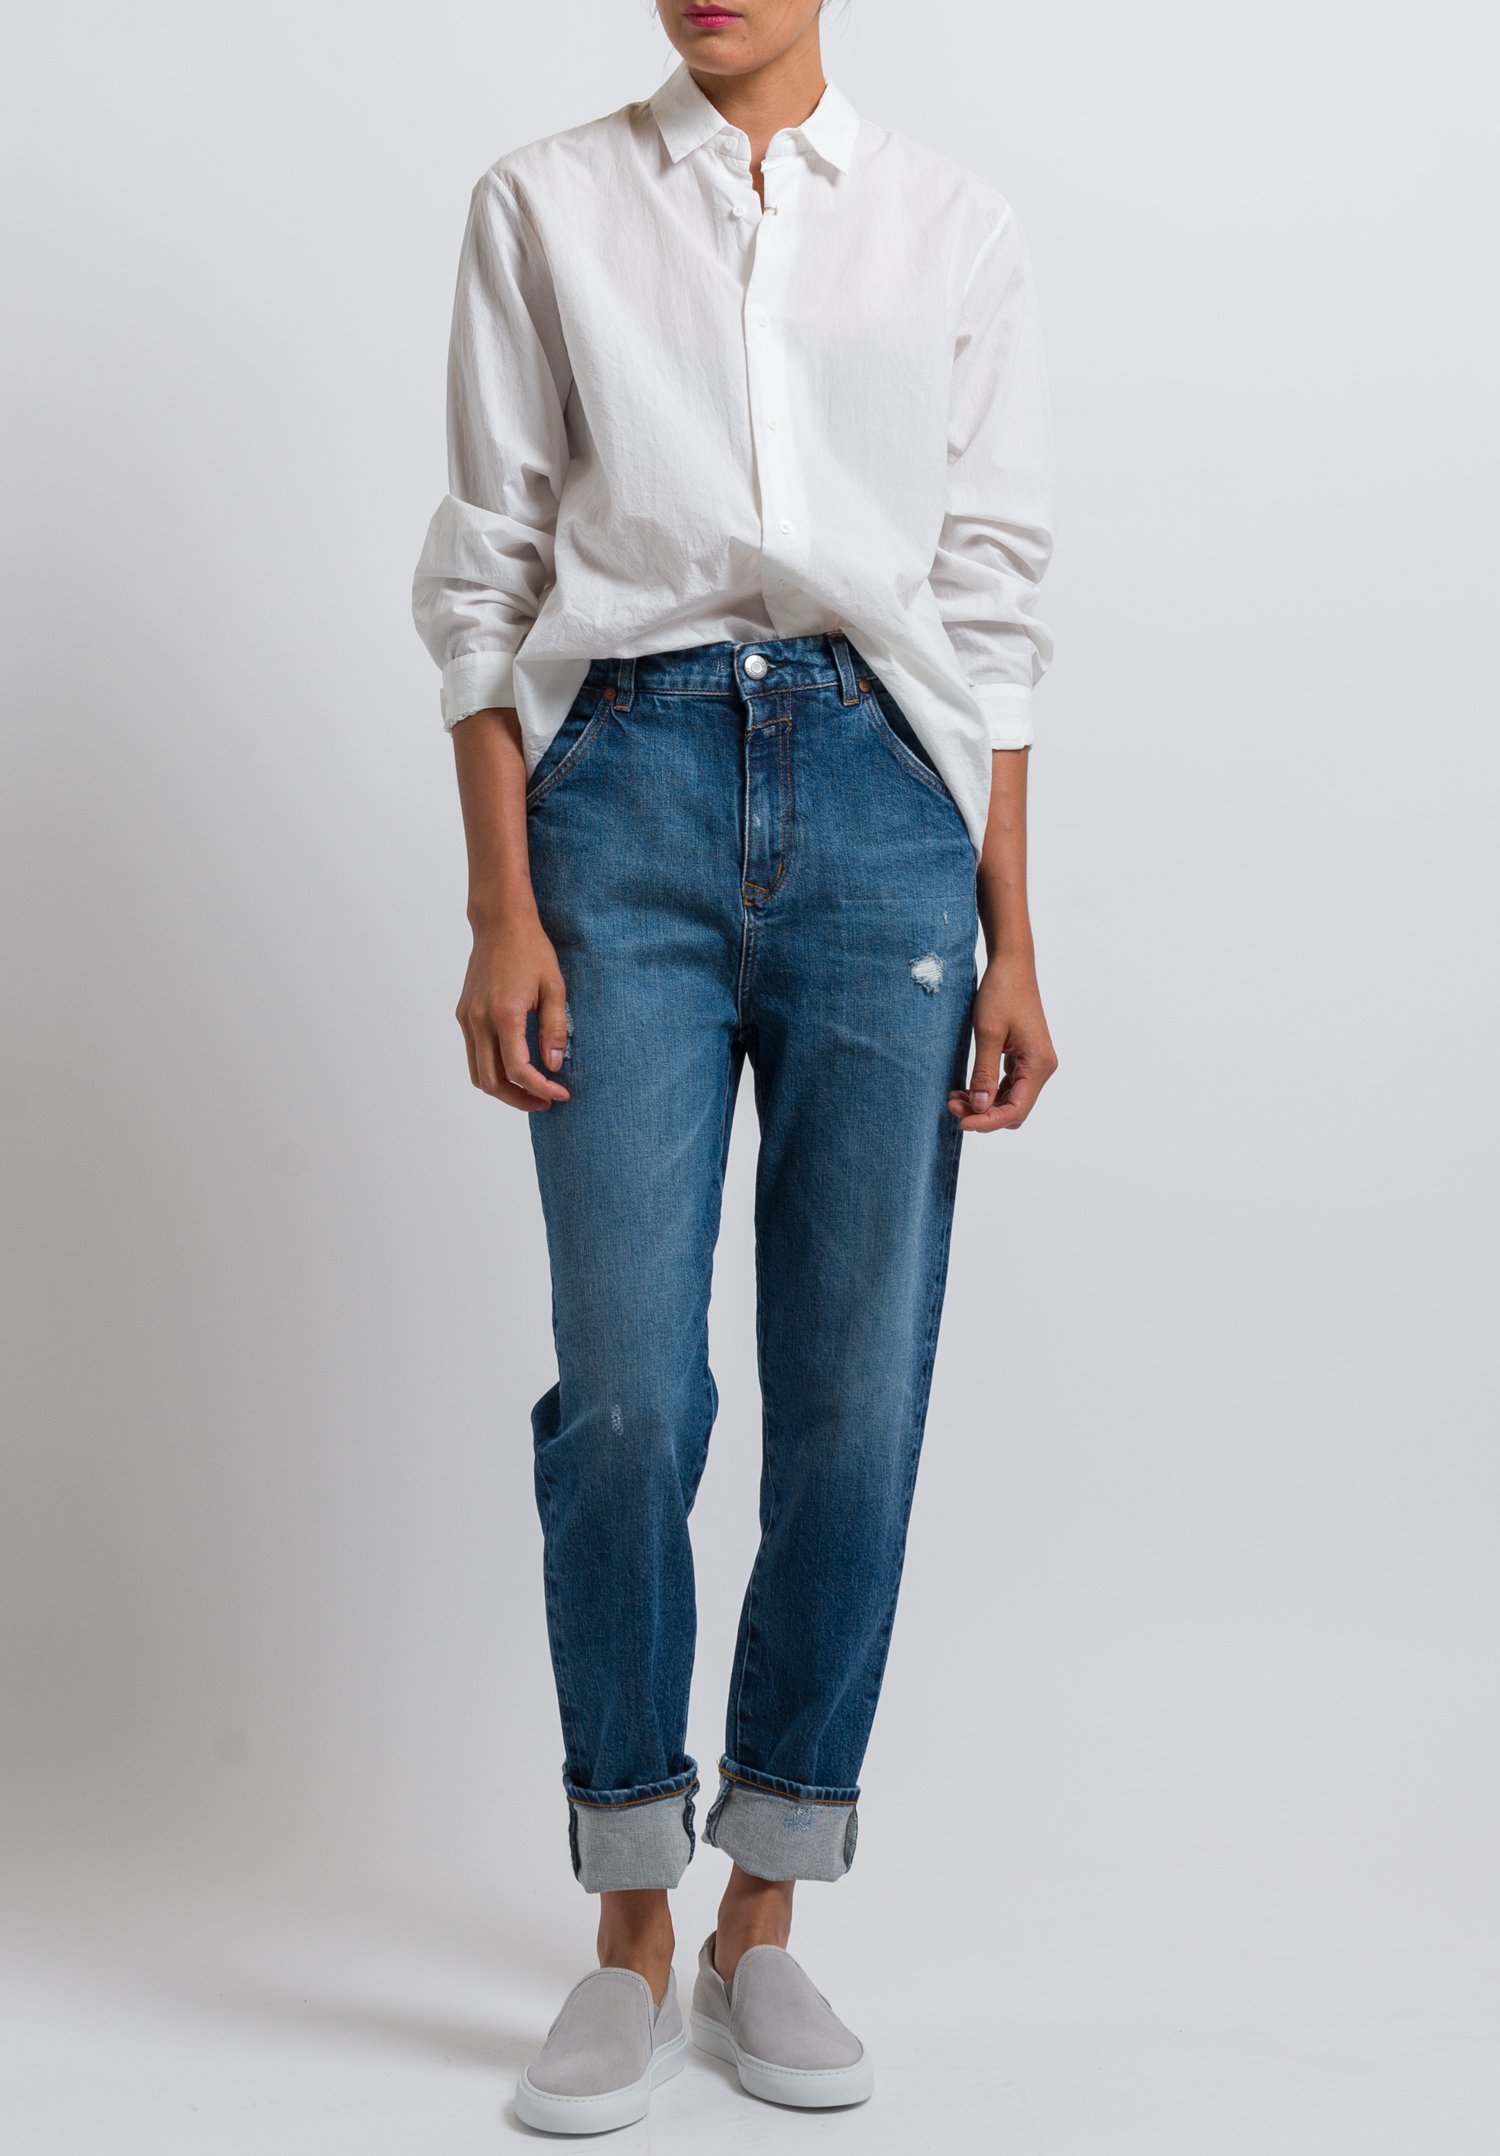 Closed Relaxed Luca Jeans in Eco Faded Worn | Santa Fe Dry Goods ...